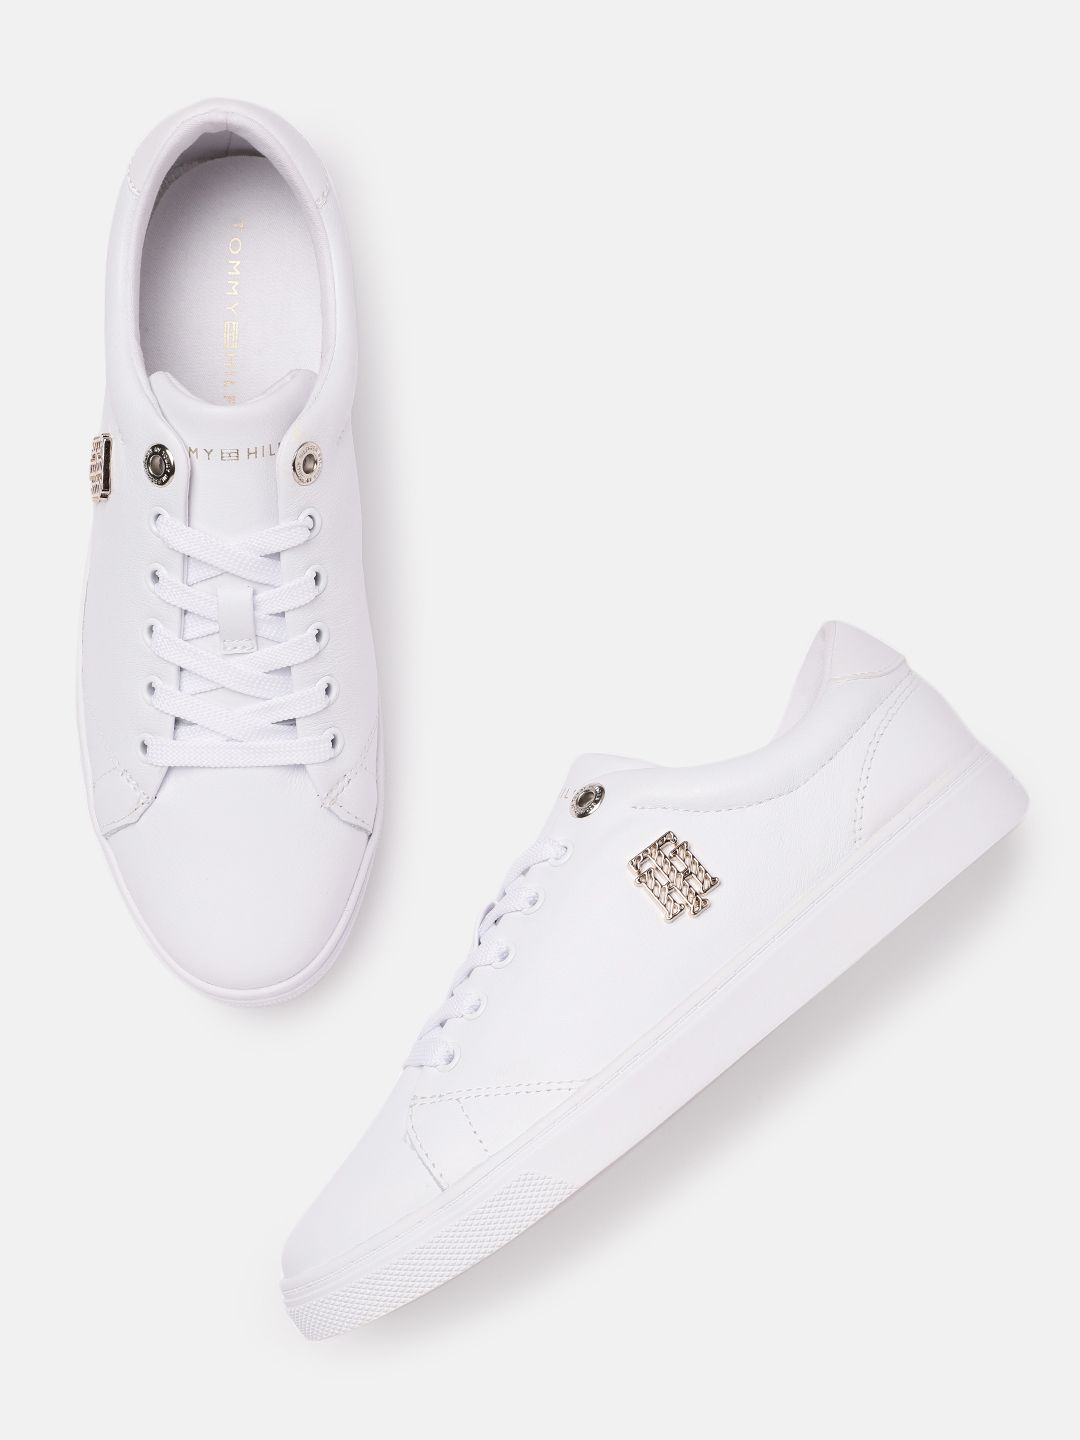 Tommy Hilfiger Women White Solid Leather Regular Sneakers with Brand Logo Applique Detail Price in India